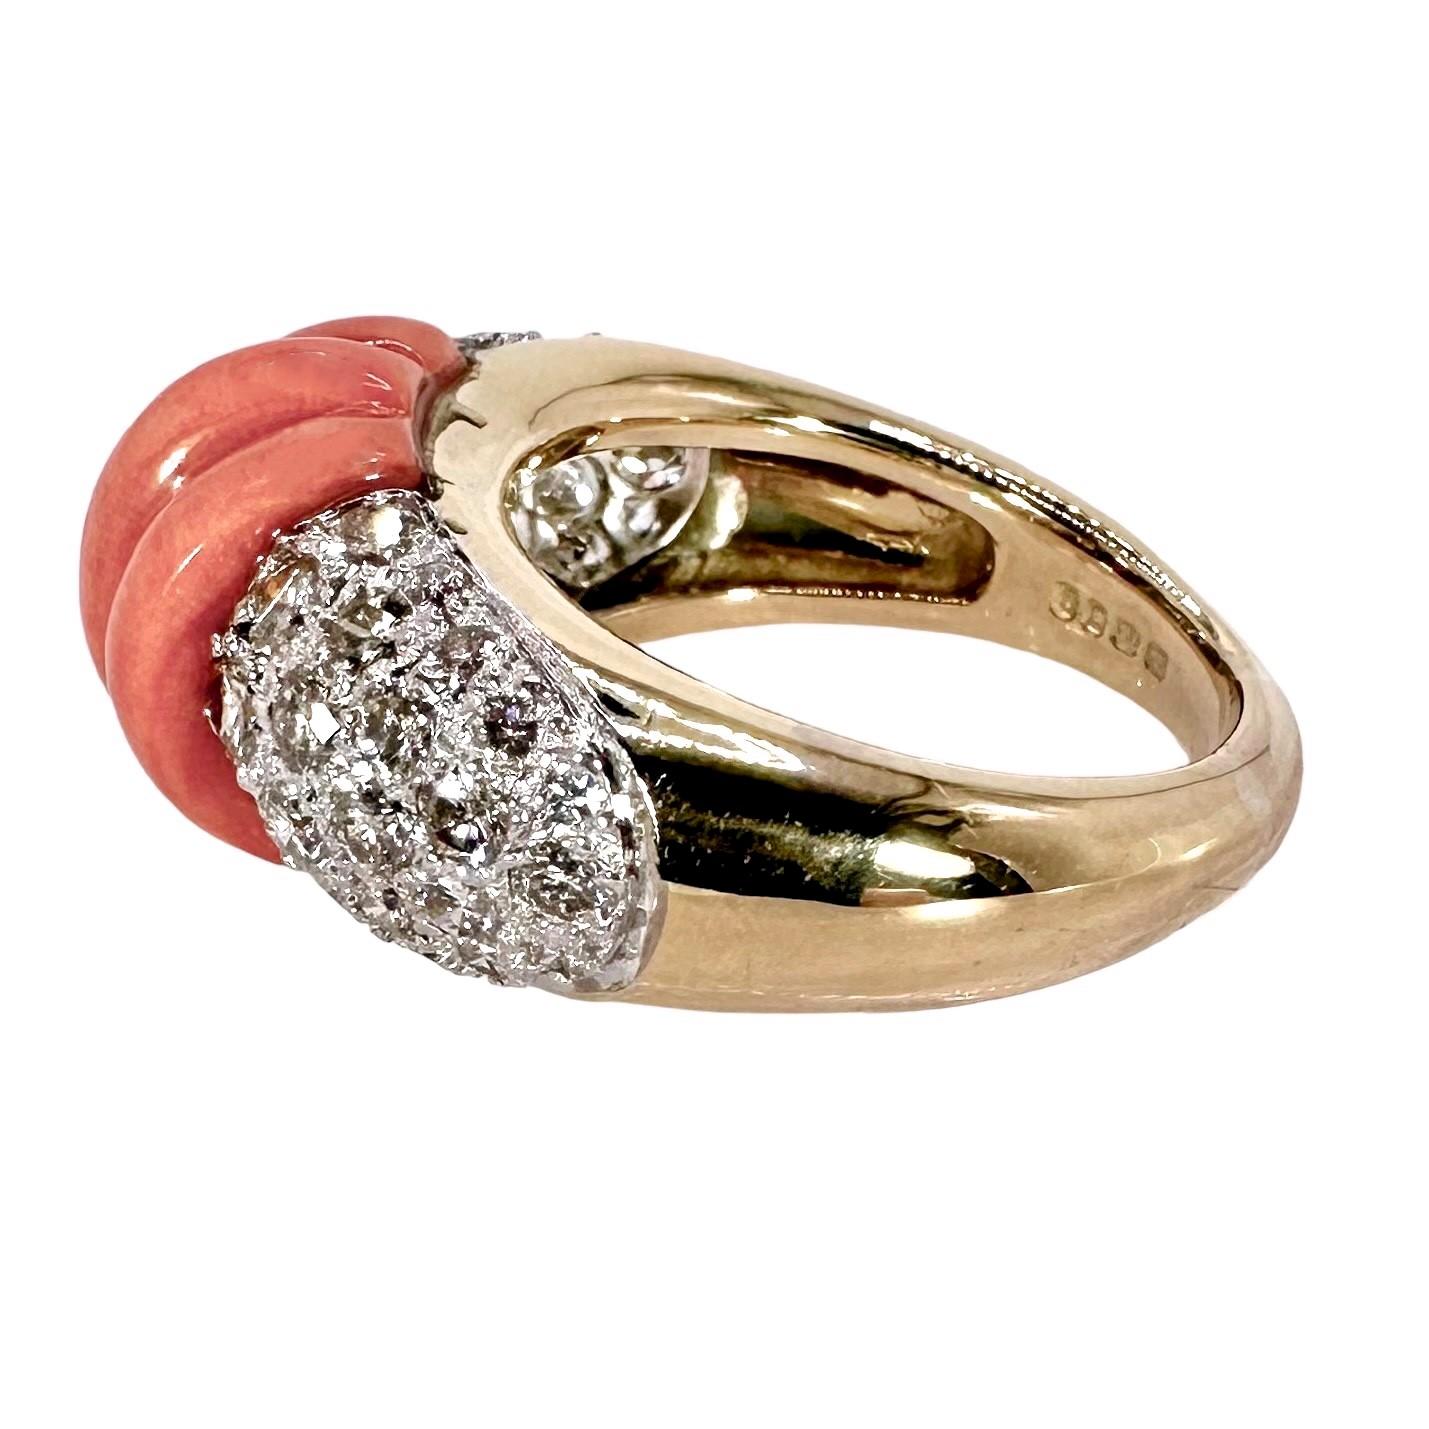 Women's Vintage Kutchinsky 18k Yellow Gold, Diamond and Fluted Coral Cocktail Ring * For Sale